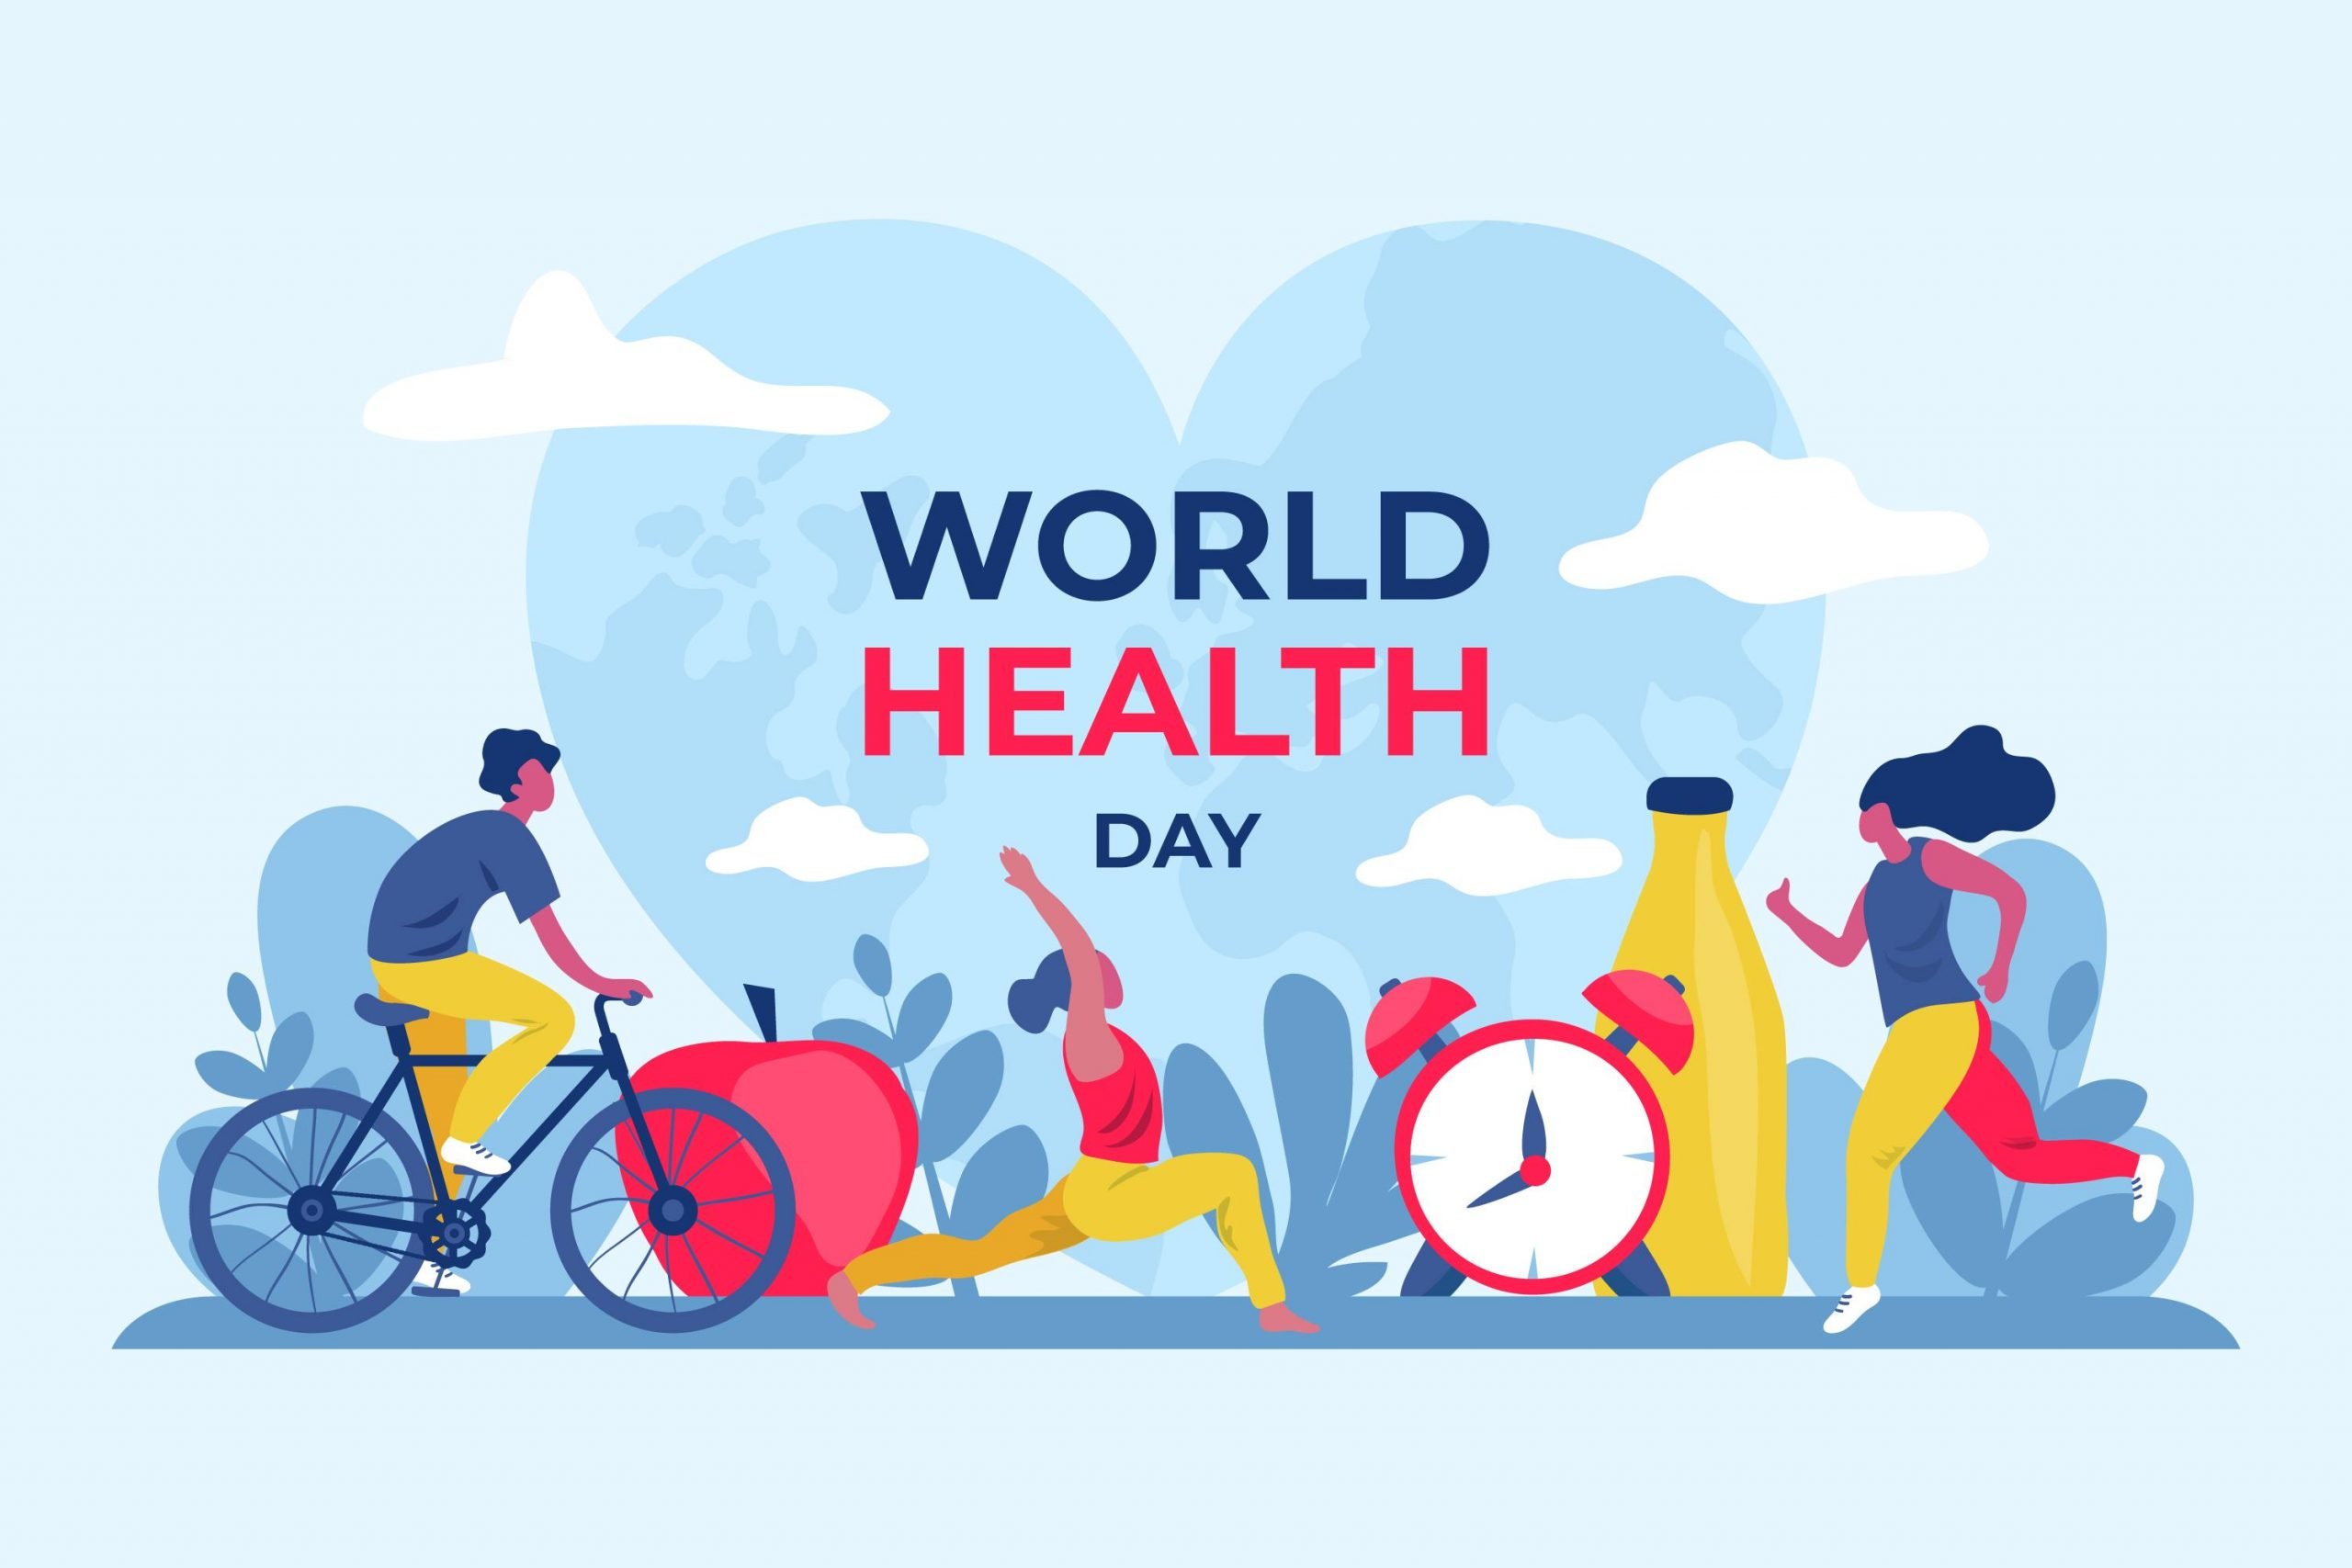 World Health Day: WHO’s 75 Years Of Public Health Success & Ways To Support Employee Health